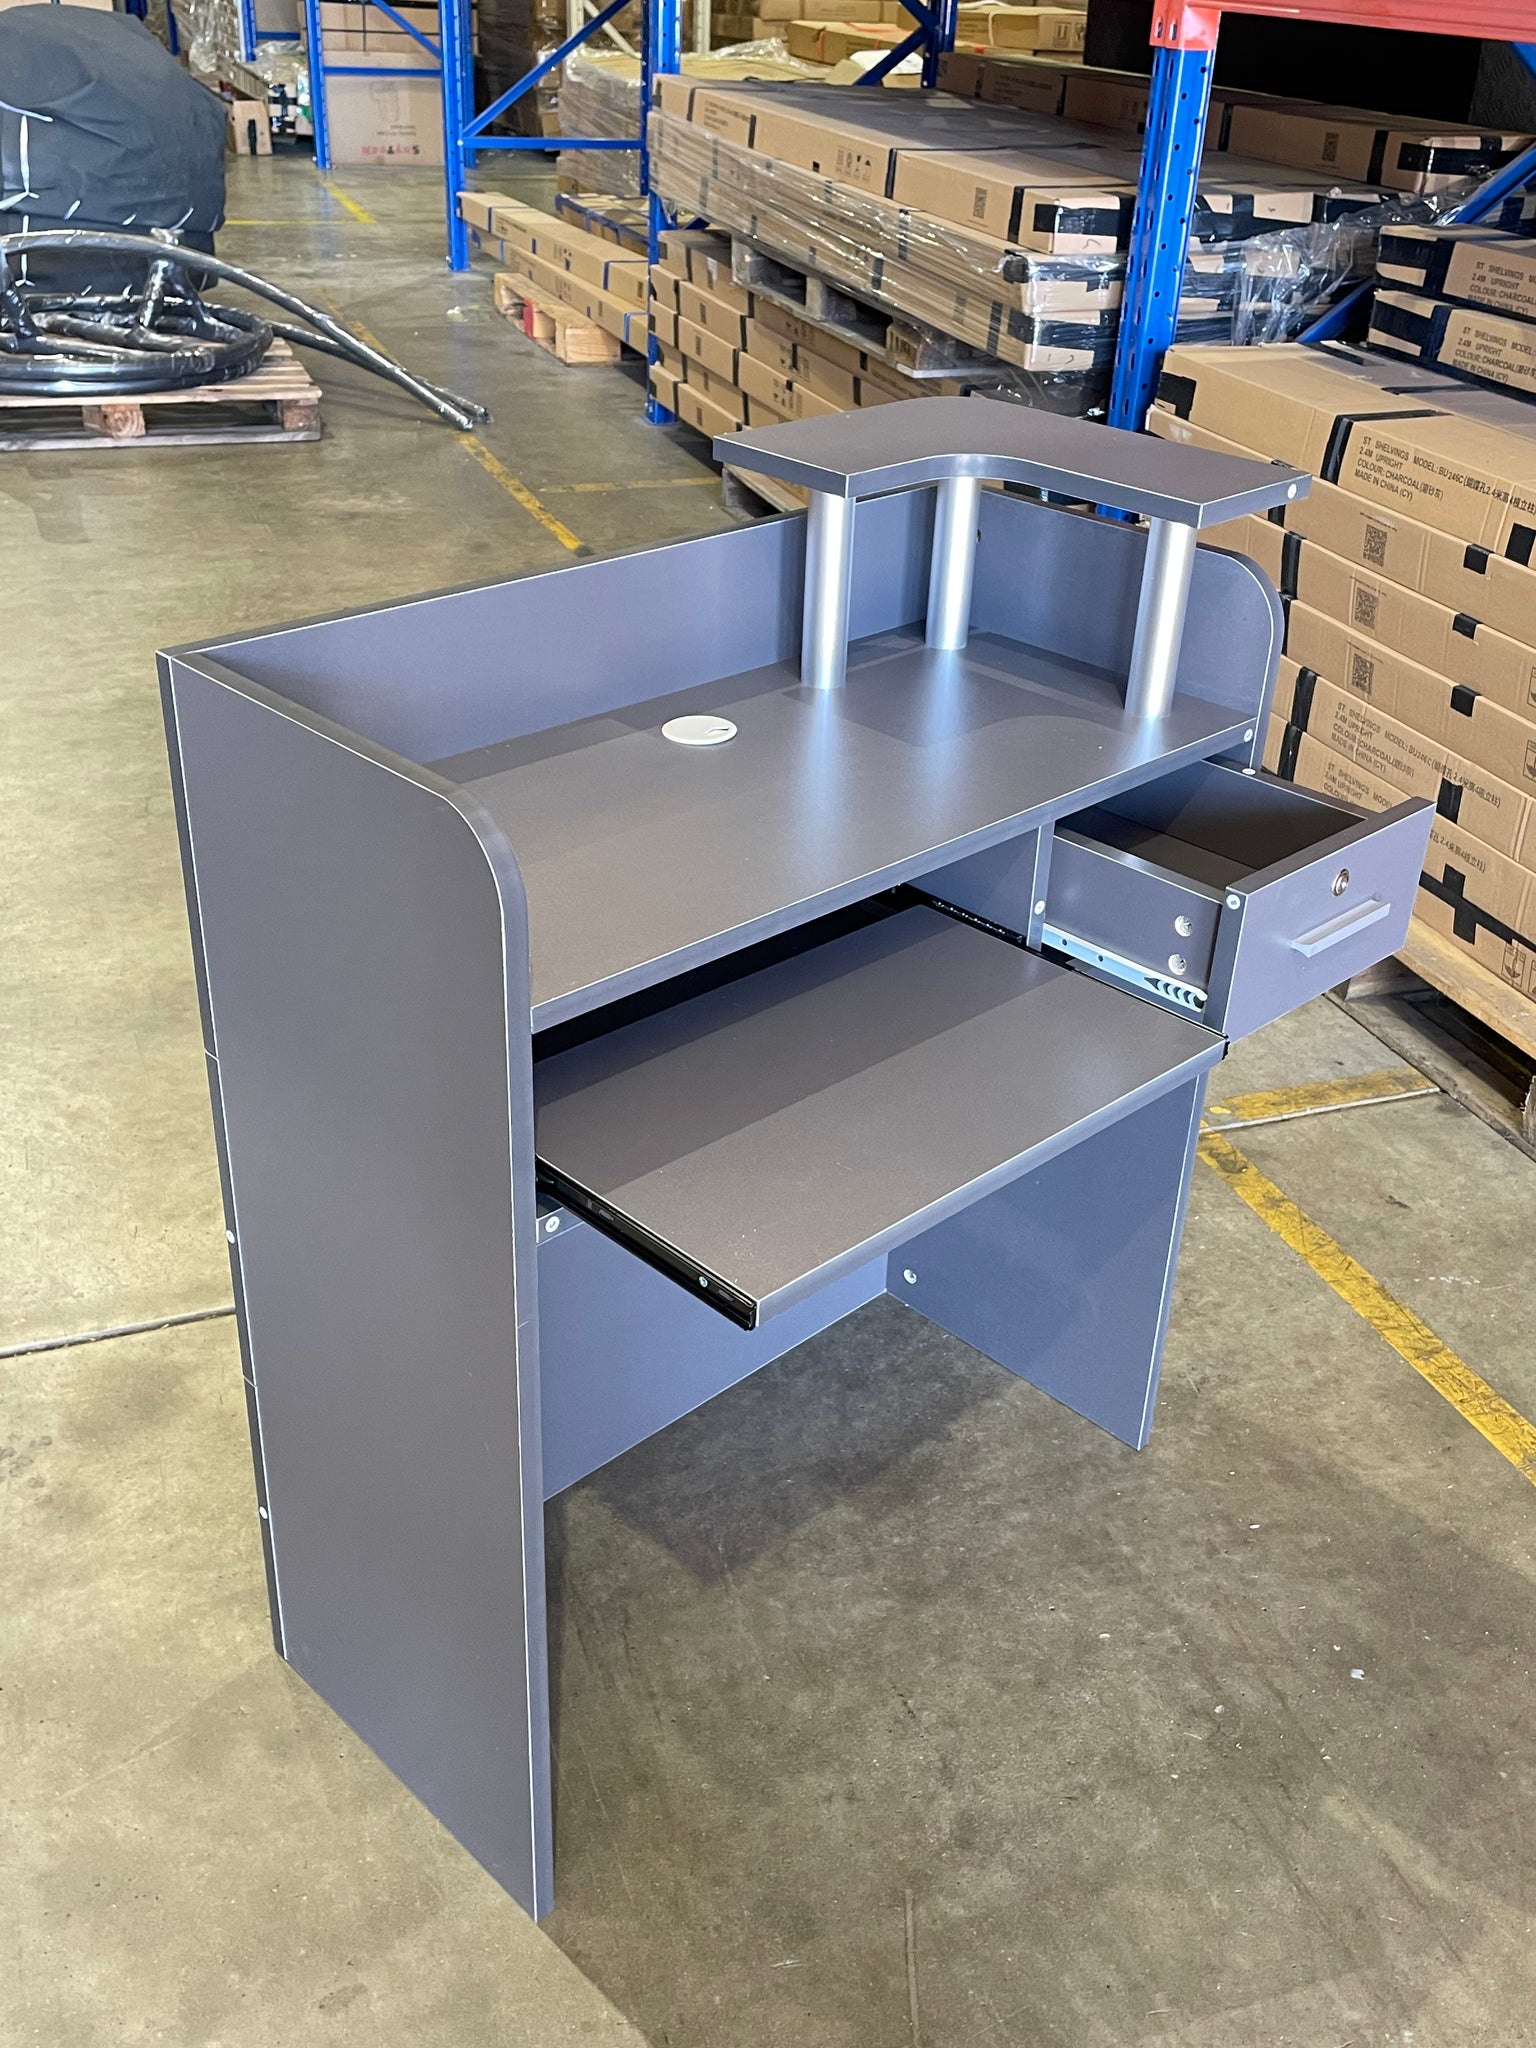 BRAND NEW 80CM SMALL GREY CHARCOAL COMPACT RECEPTION DESK